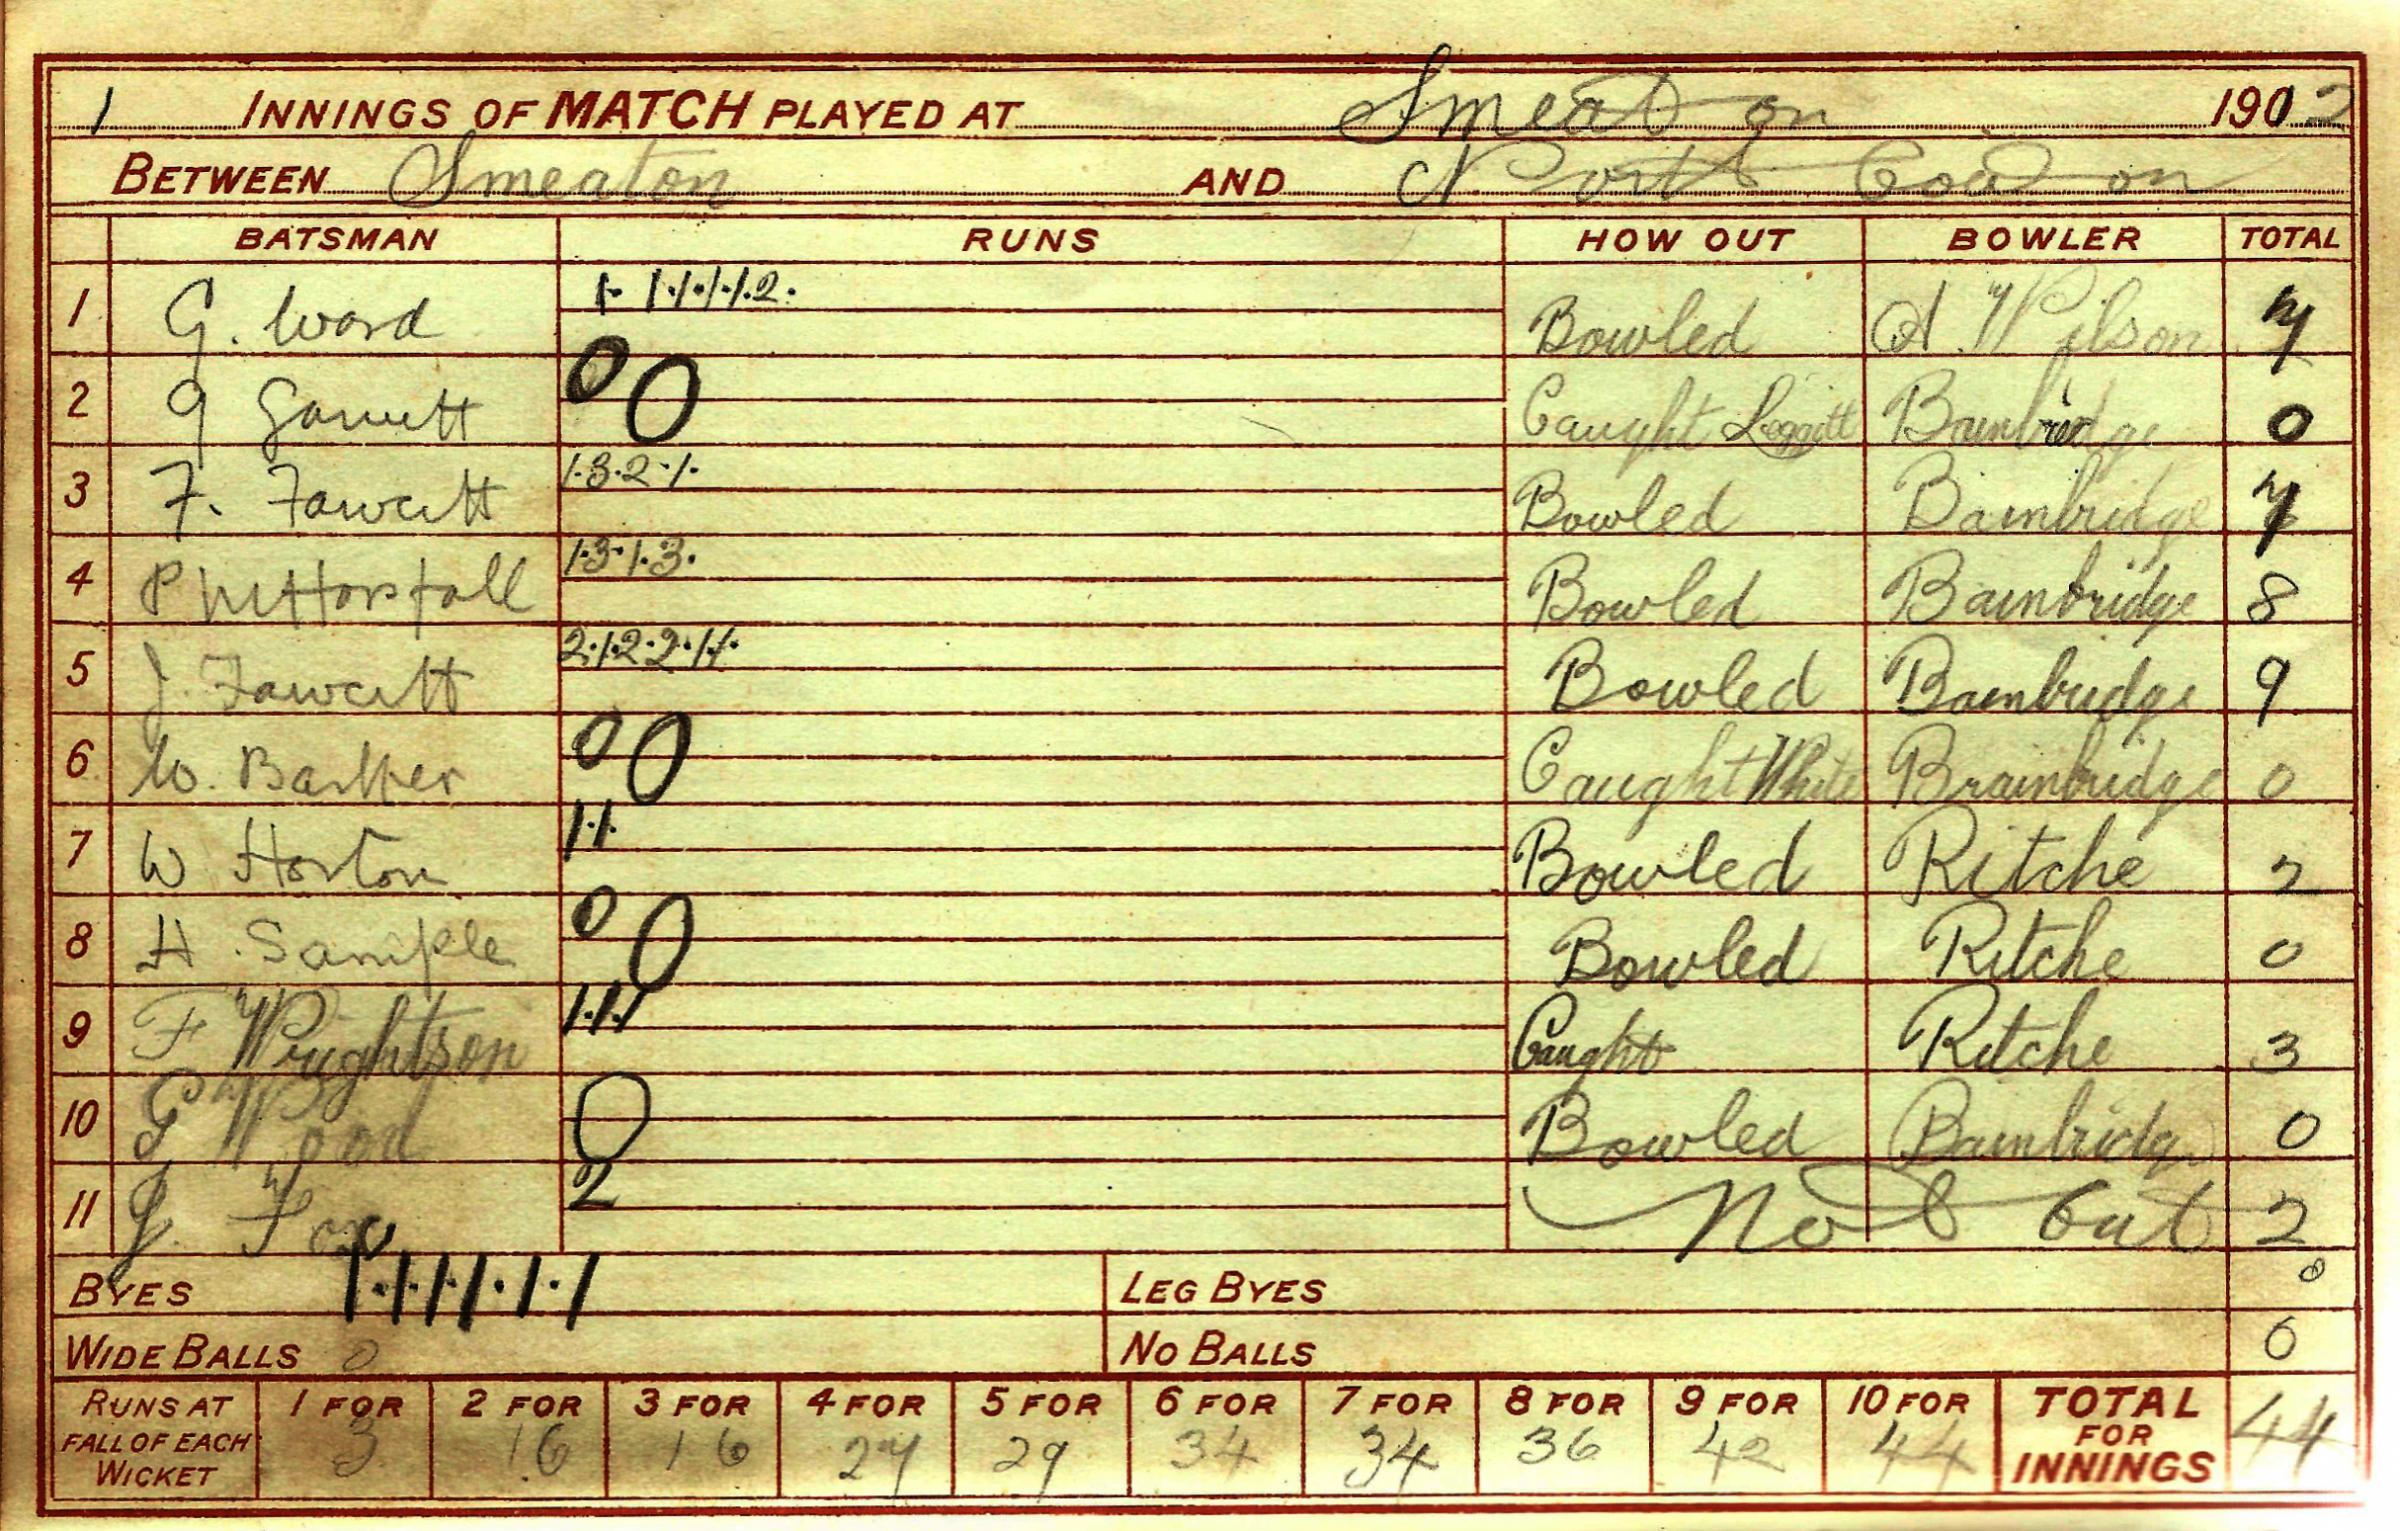 The scorebook from Great Smeatons innings against North Cowton in 1912